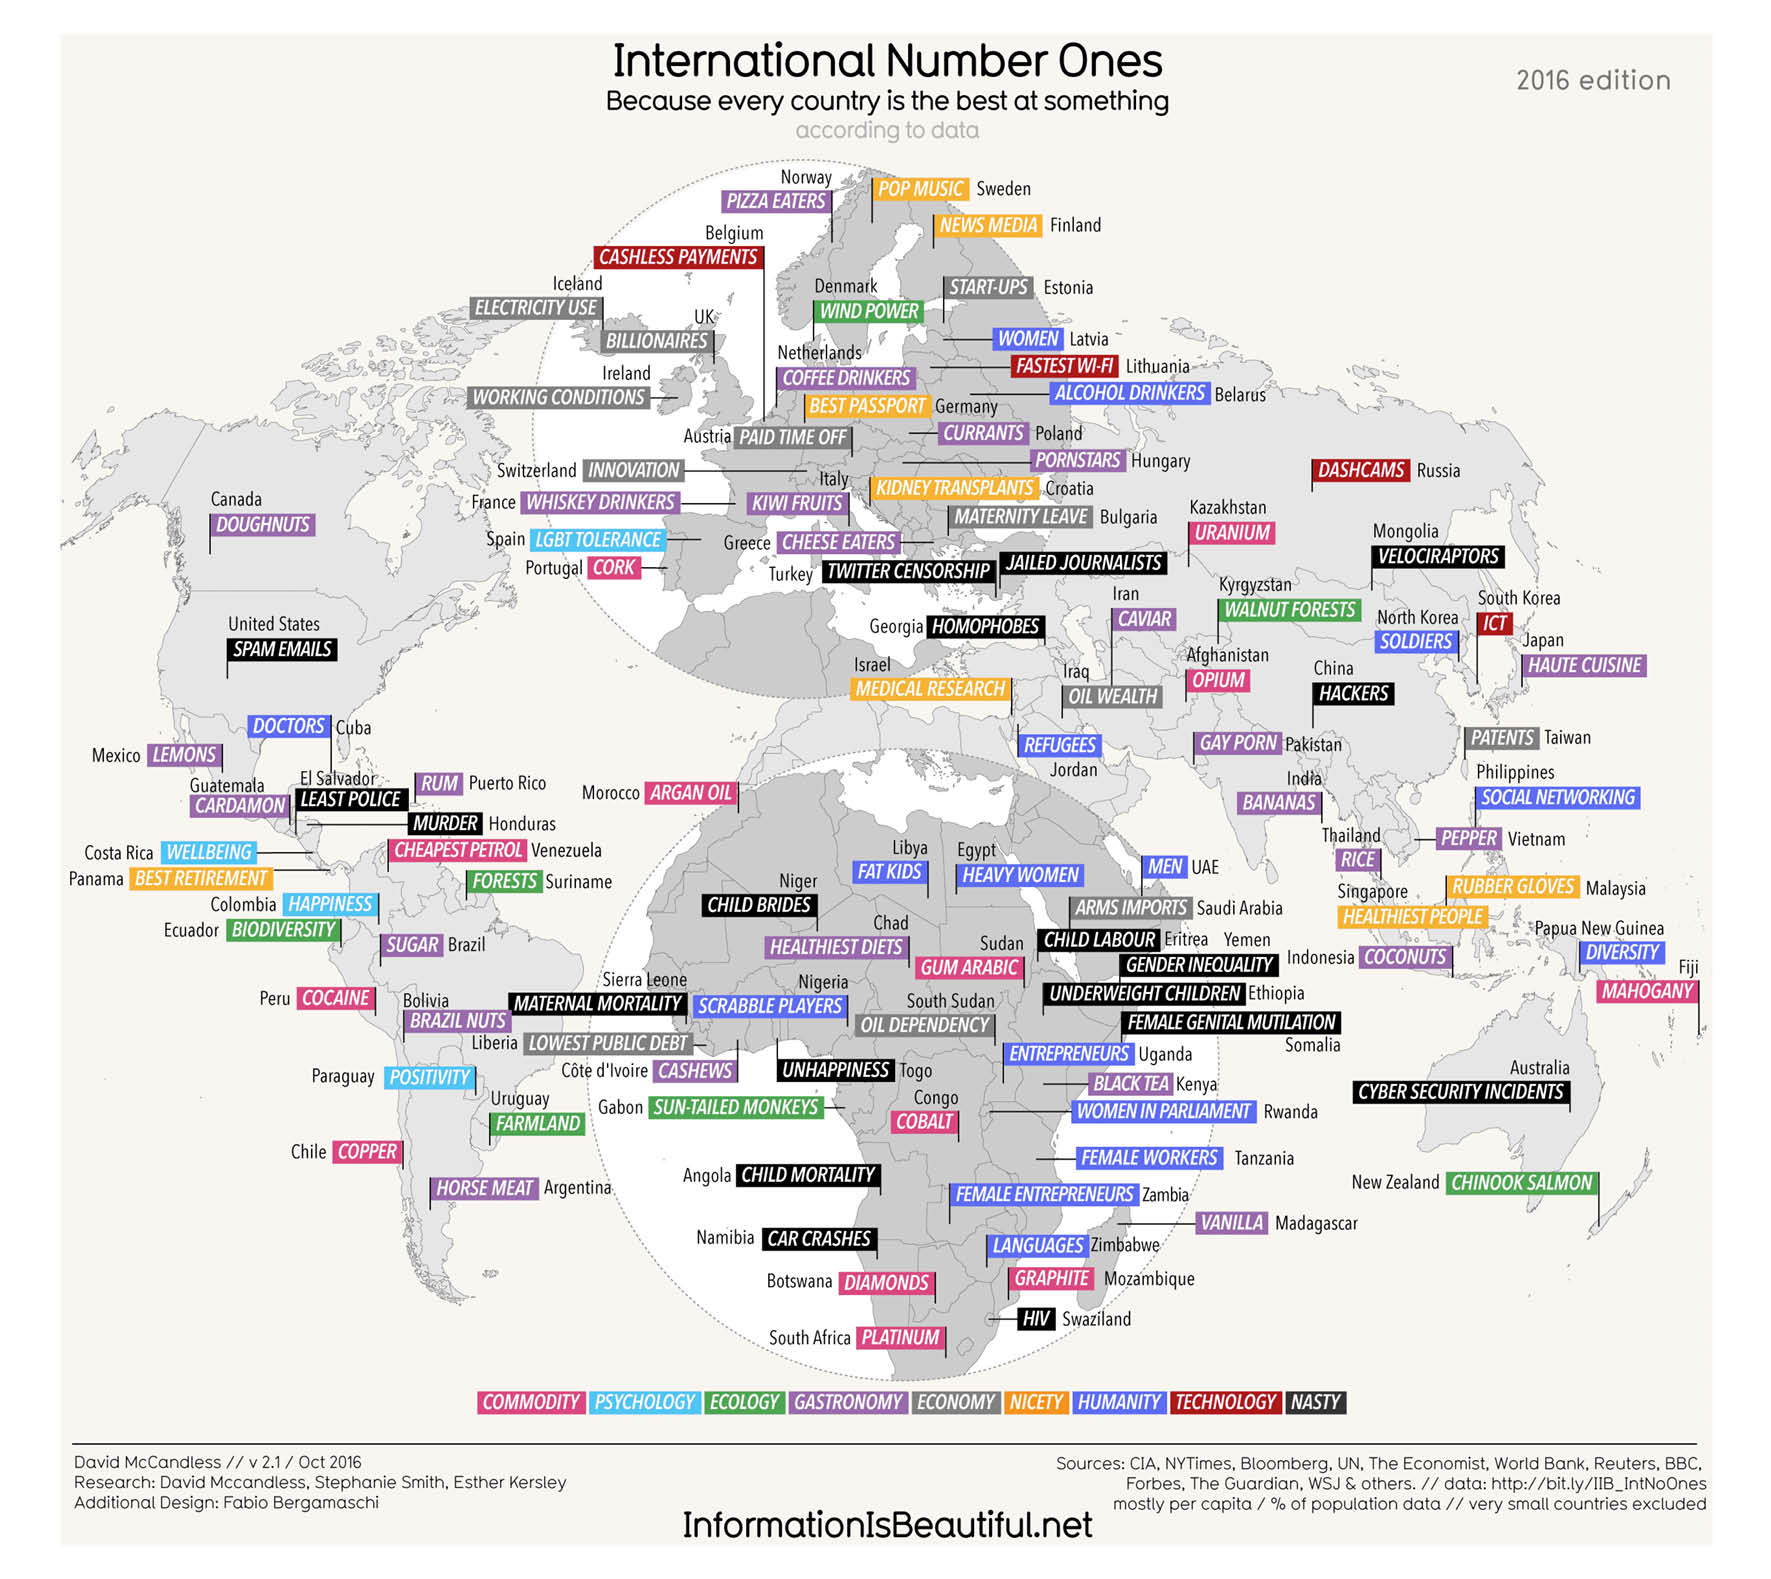 https://www.informationisbeautiful.net/visualizations/because-every-country-is-the-best-at-something/